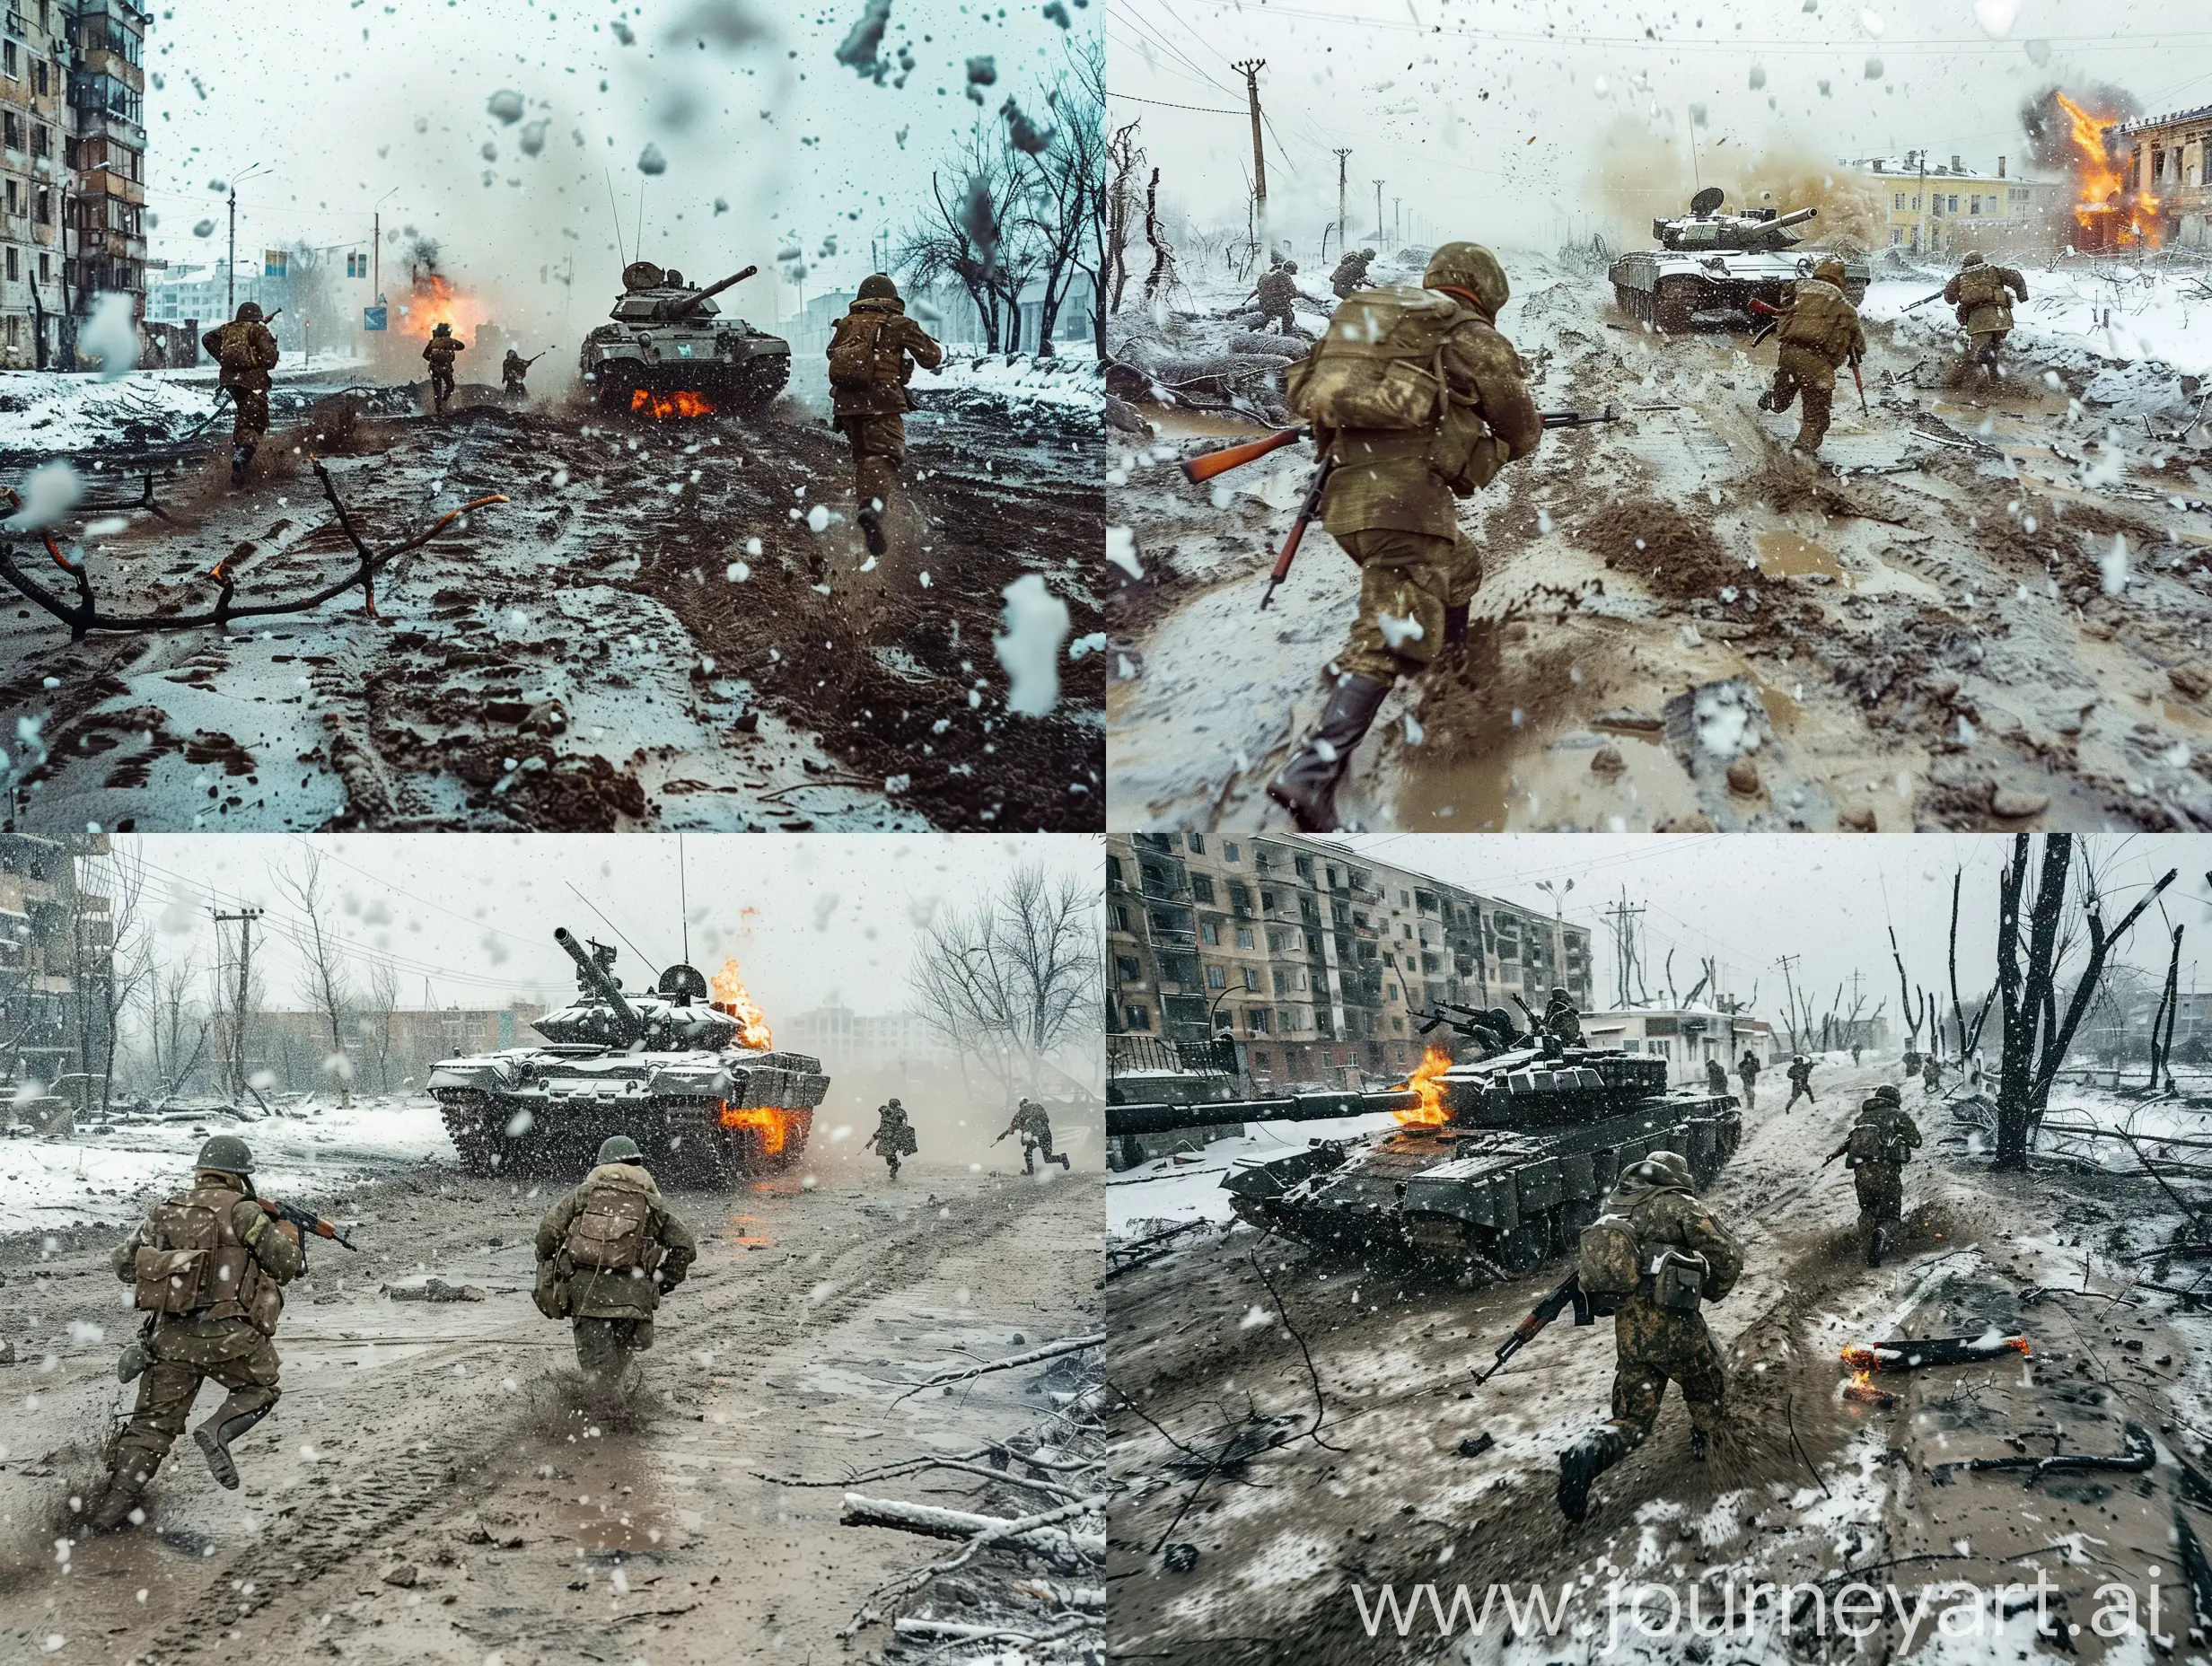 SNOW! Russian soldiers, several russian soldiers are running, TANK t-35, striking from ak-74, tank is on fire, mud everywhere, burned trees, snowfall drops, wide angle image, buildings under snow, 